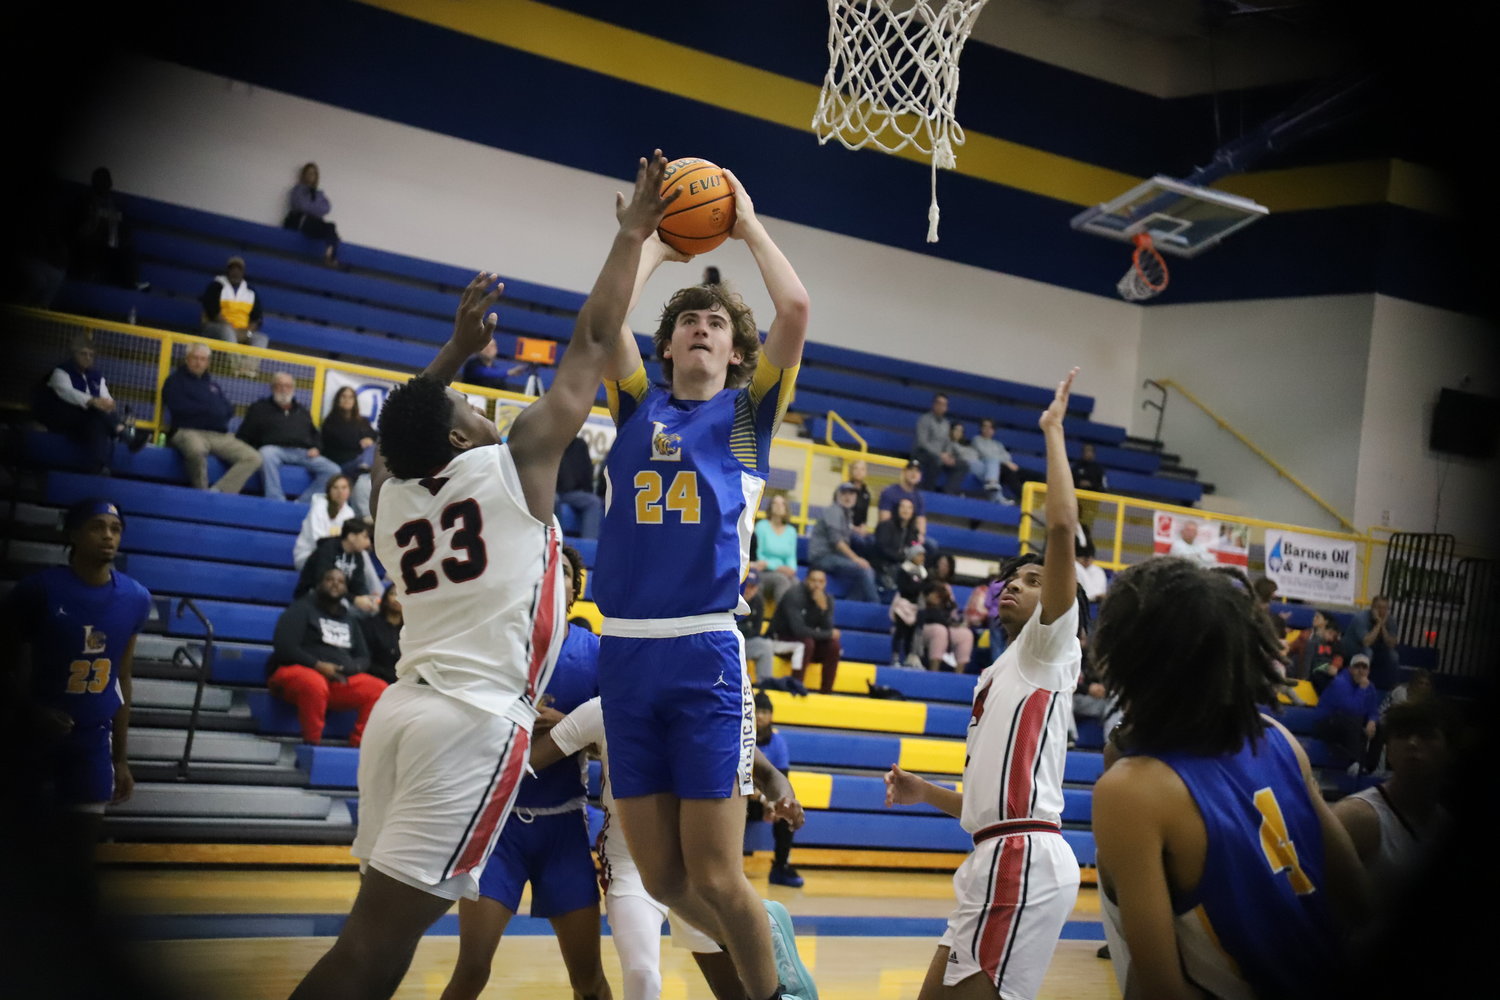 Lexington's Caleb Campbell with the offensive rebound and putback.